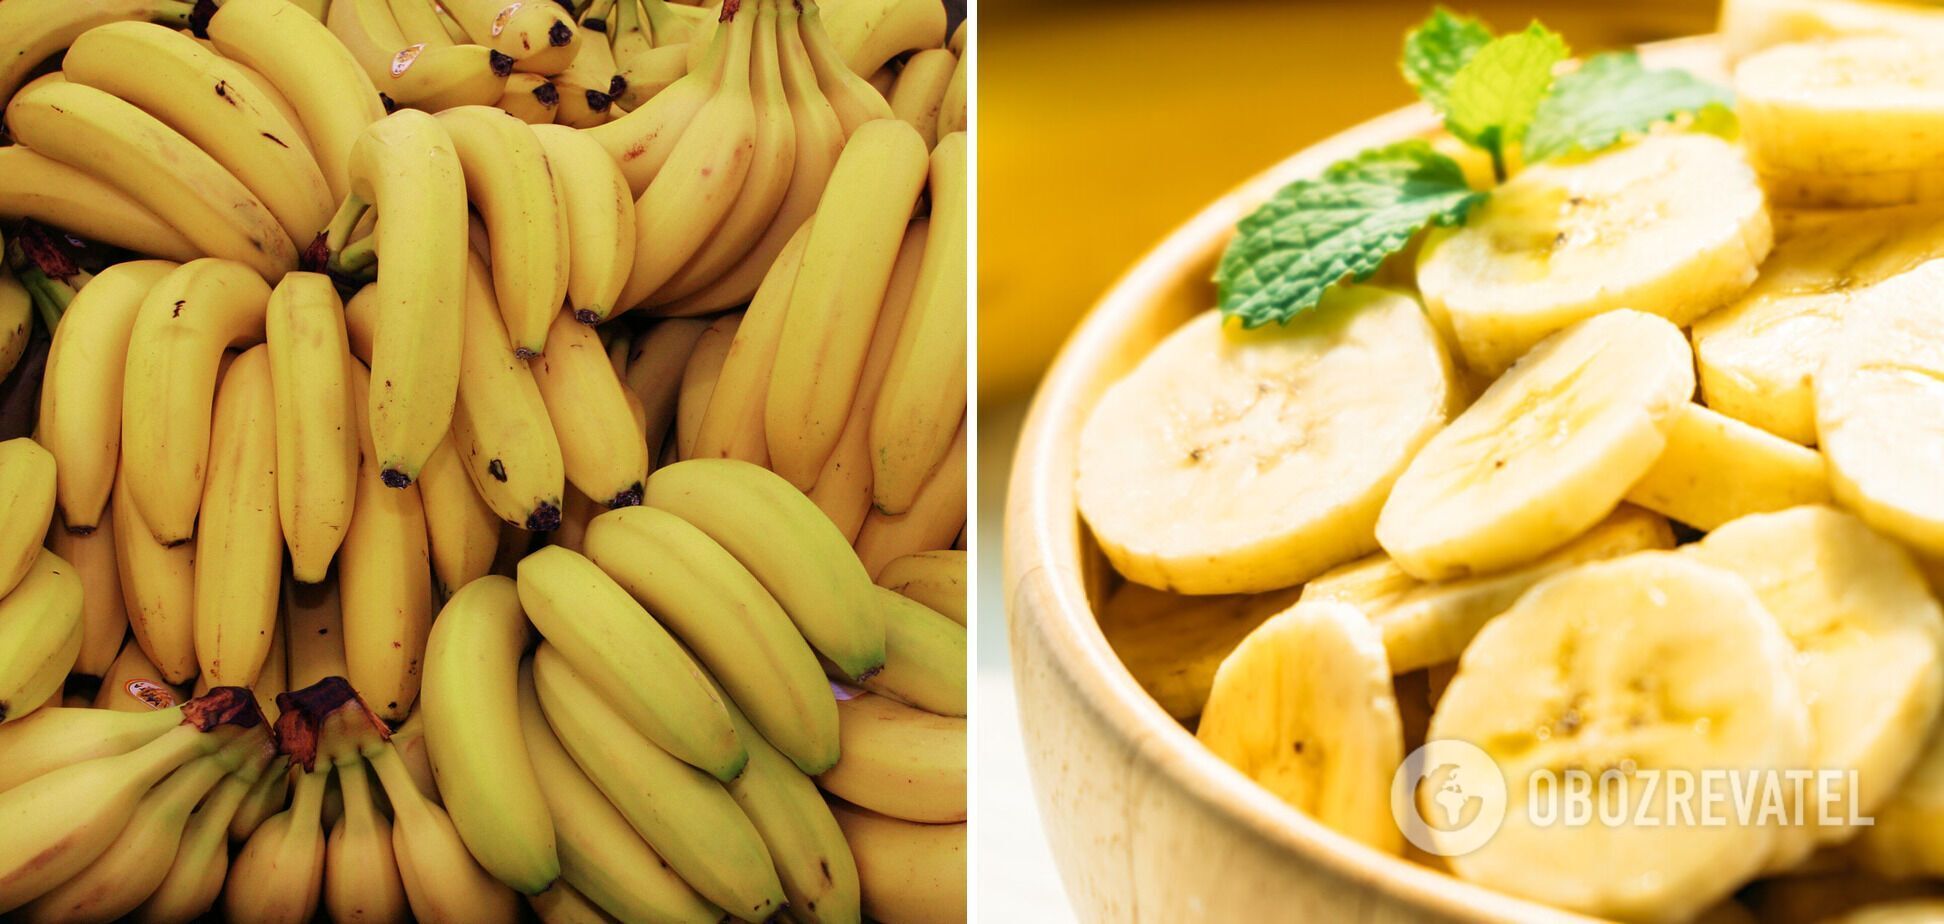 What to cook with bananas